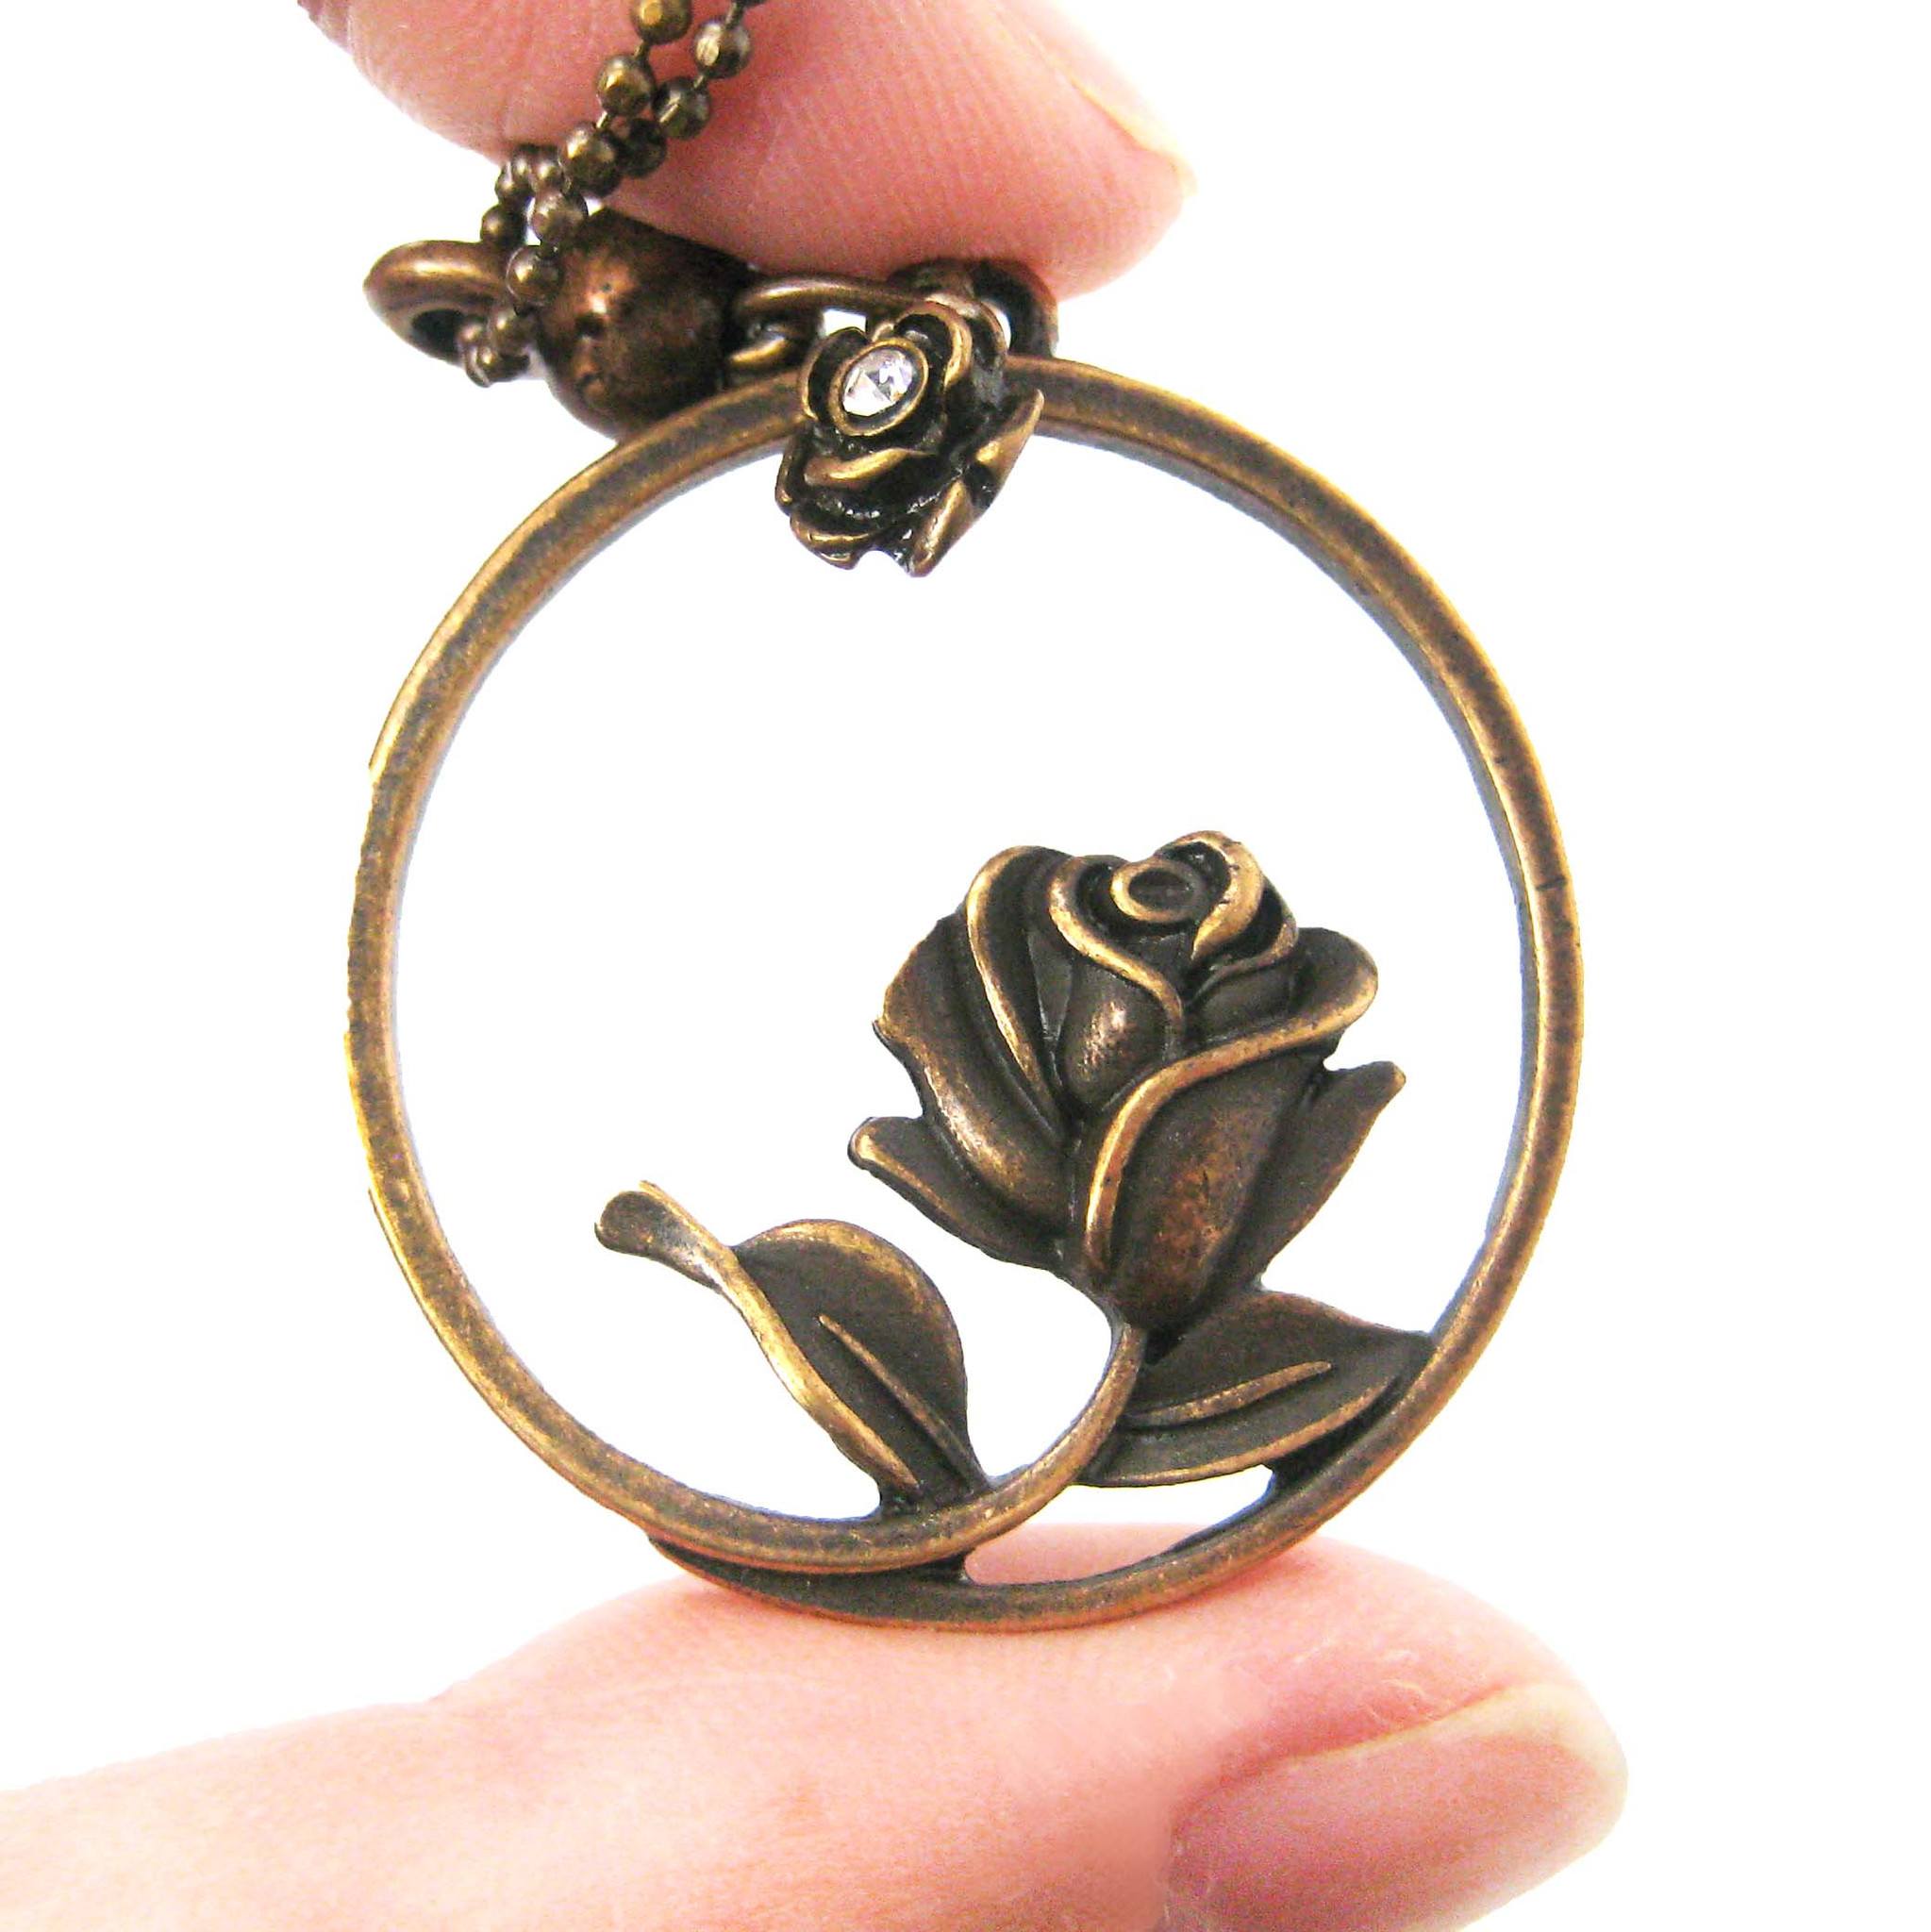 beauty-and-the-beast-inspired-rose-shaped-pendant-necklace-in-bronze.jpg